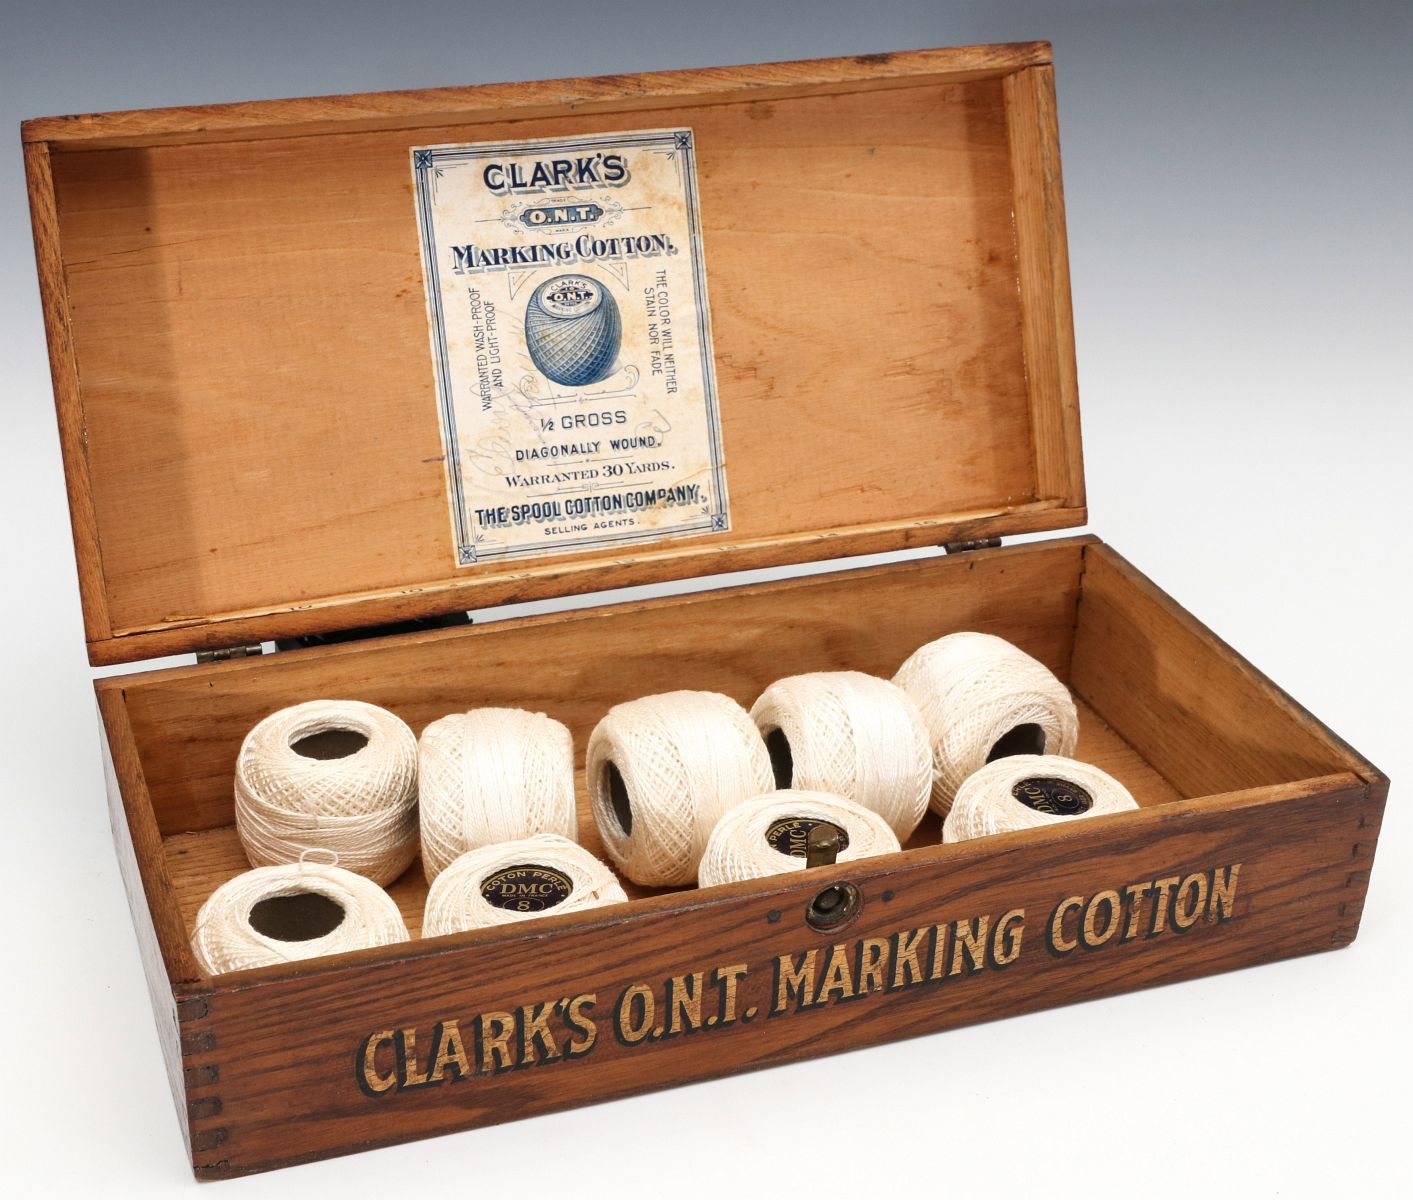 A CLARK'S O.N.T. MARKING COTTON ADVERTISING BOX